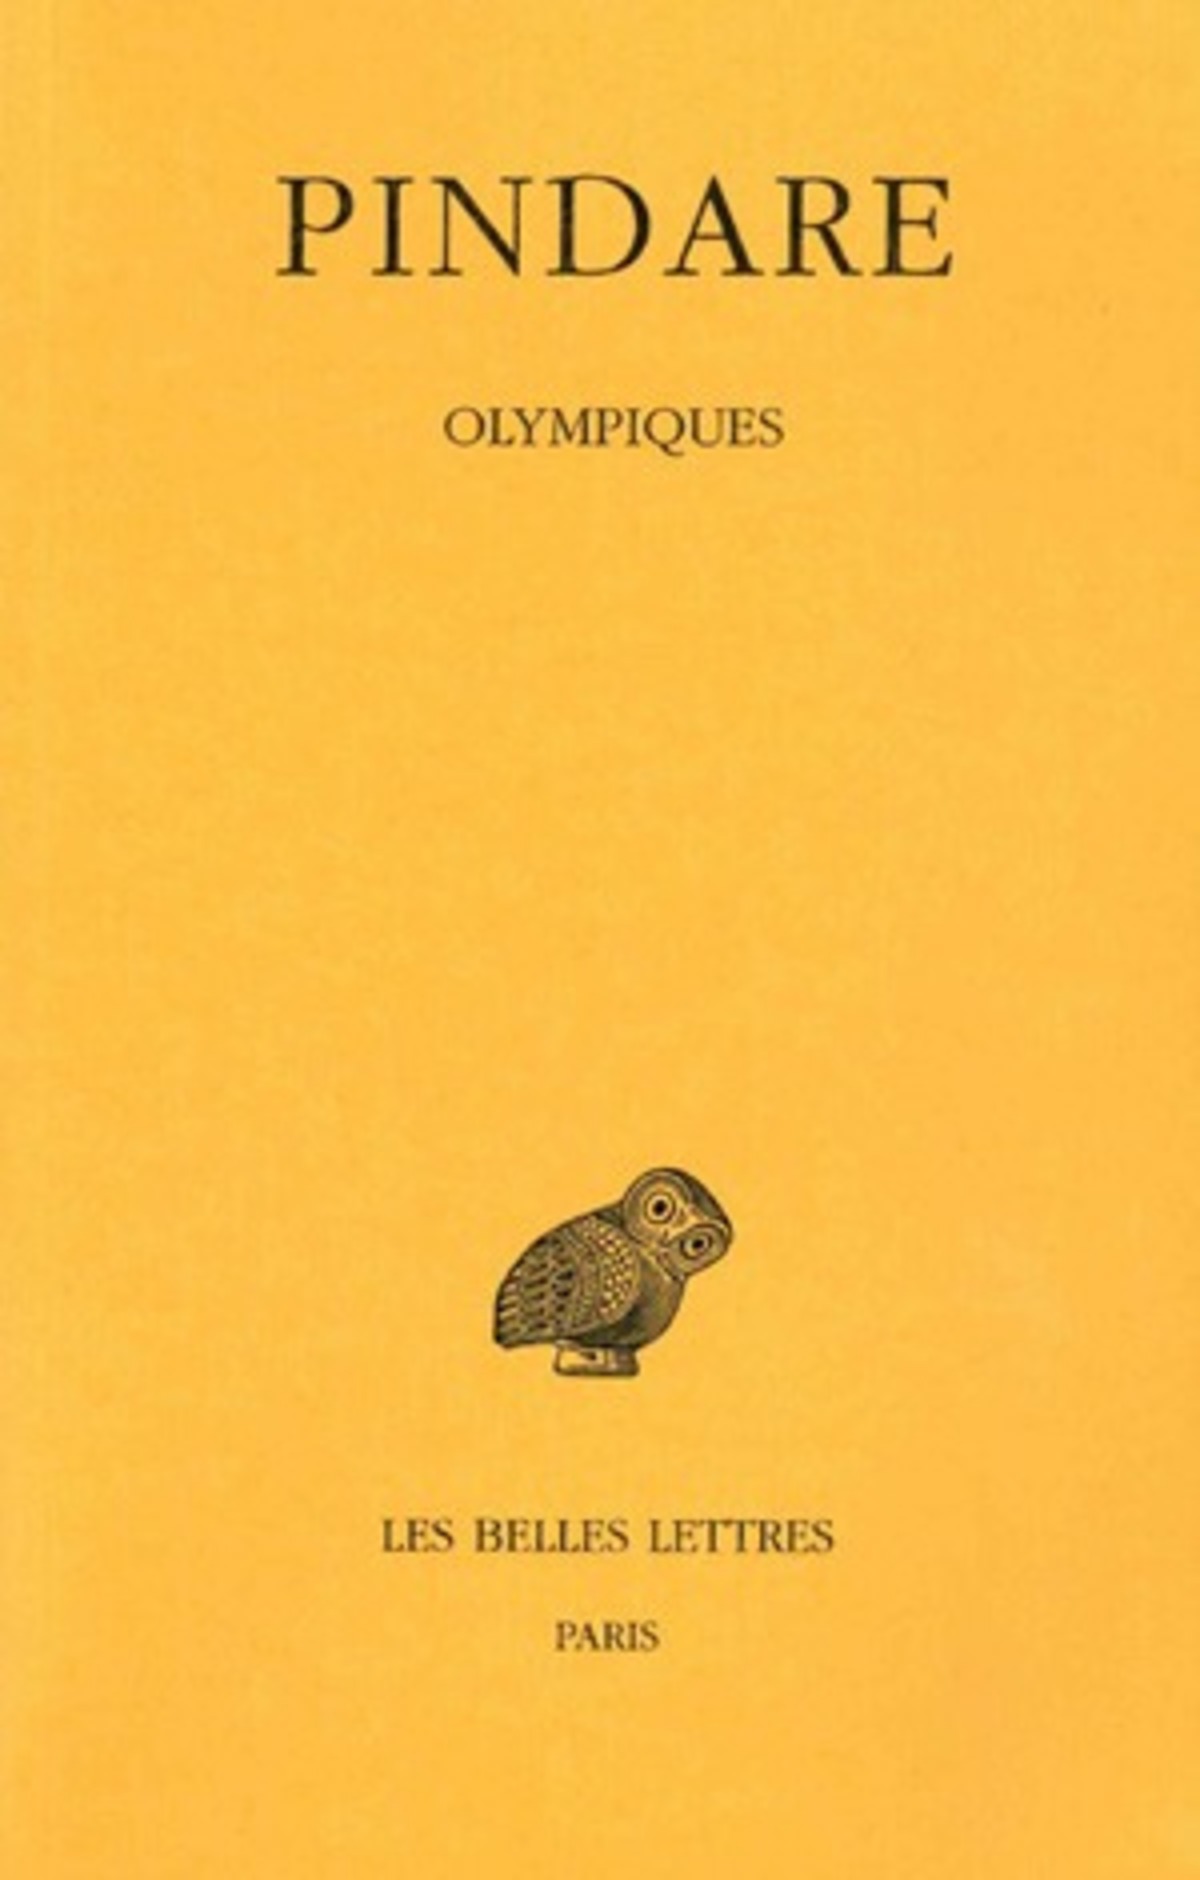 Tome I : Olympiques